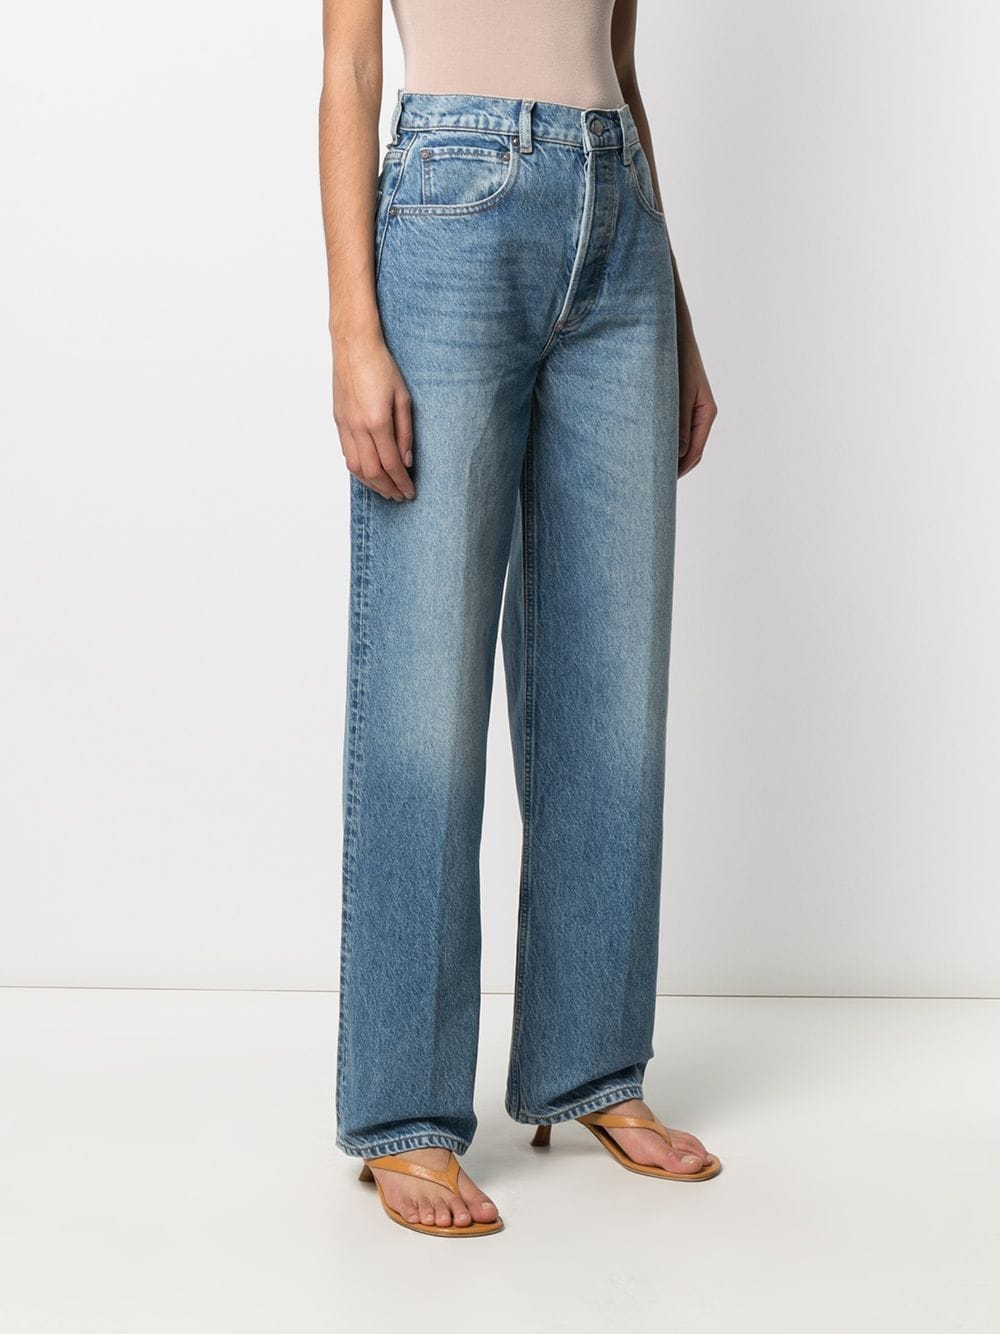 Shop Boyish Jeans wide-leg high-waisted jeans with Express Delivery ...